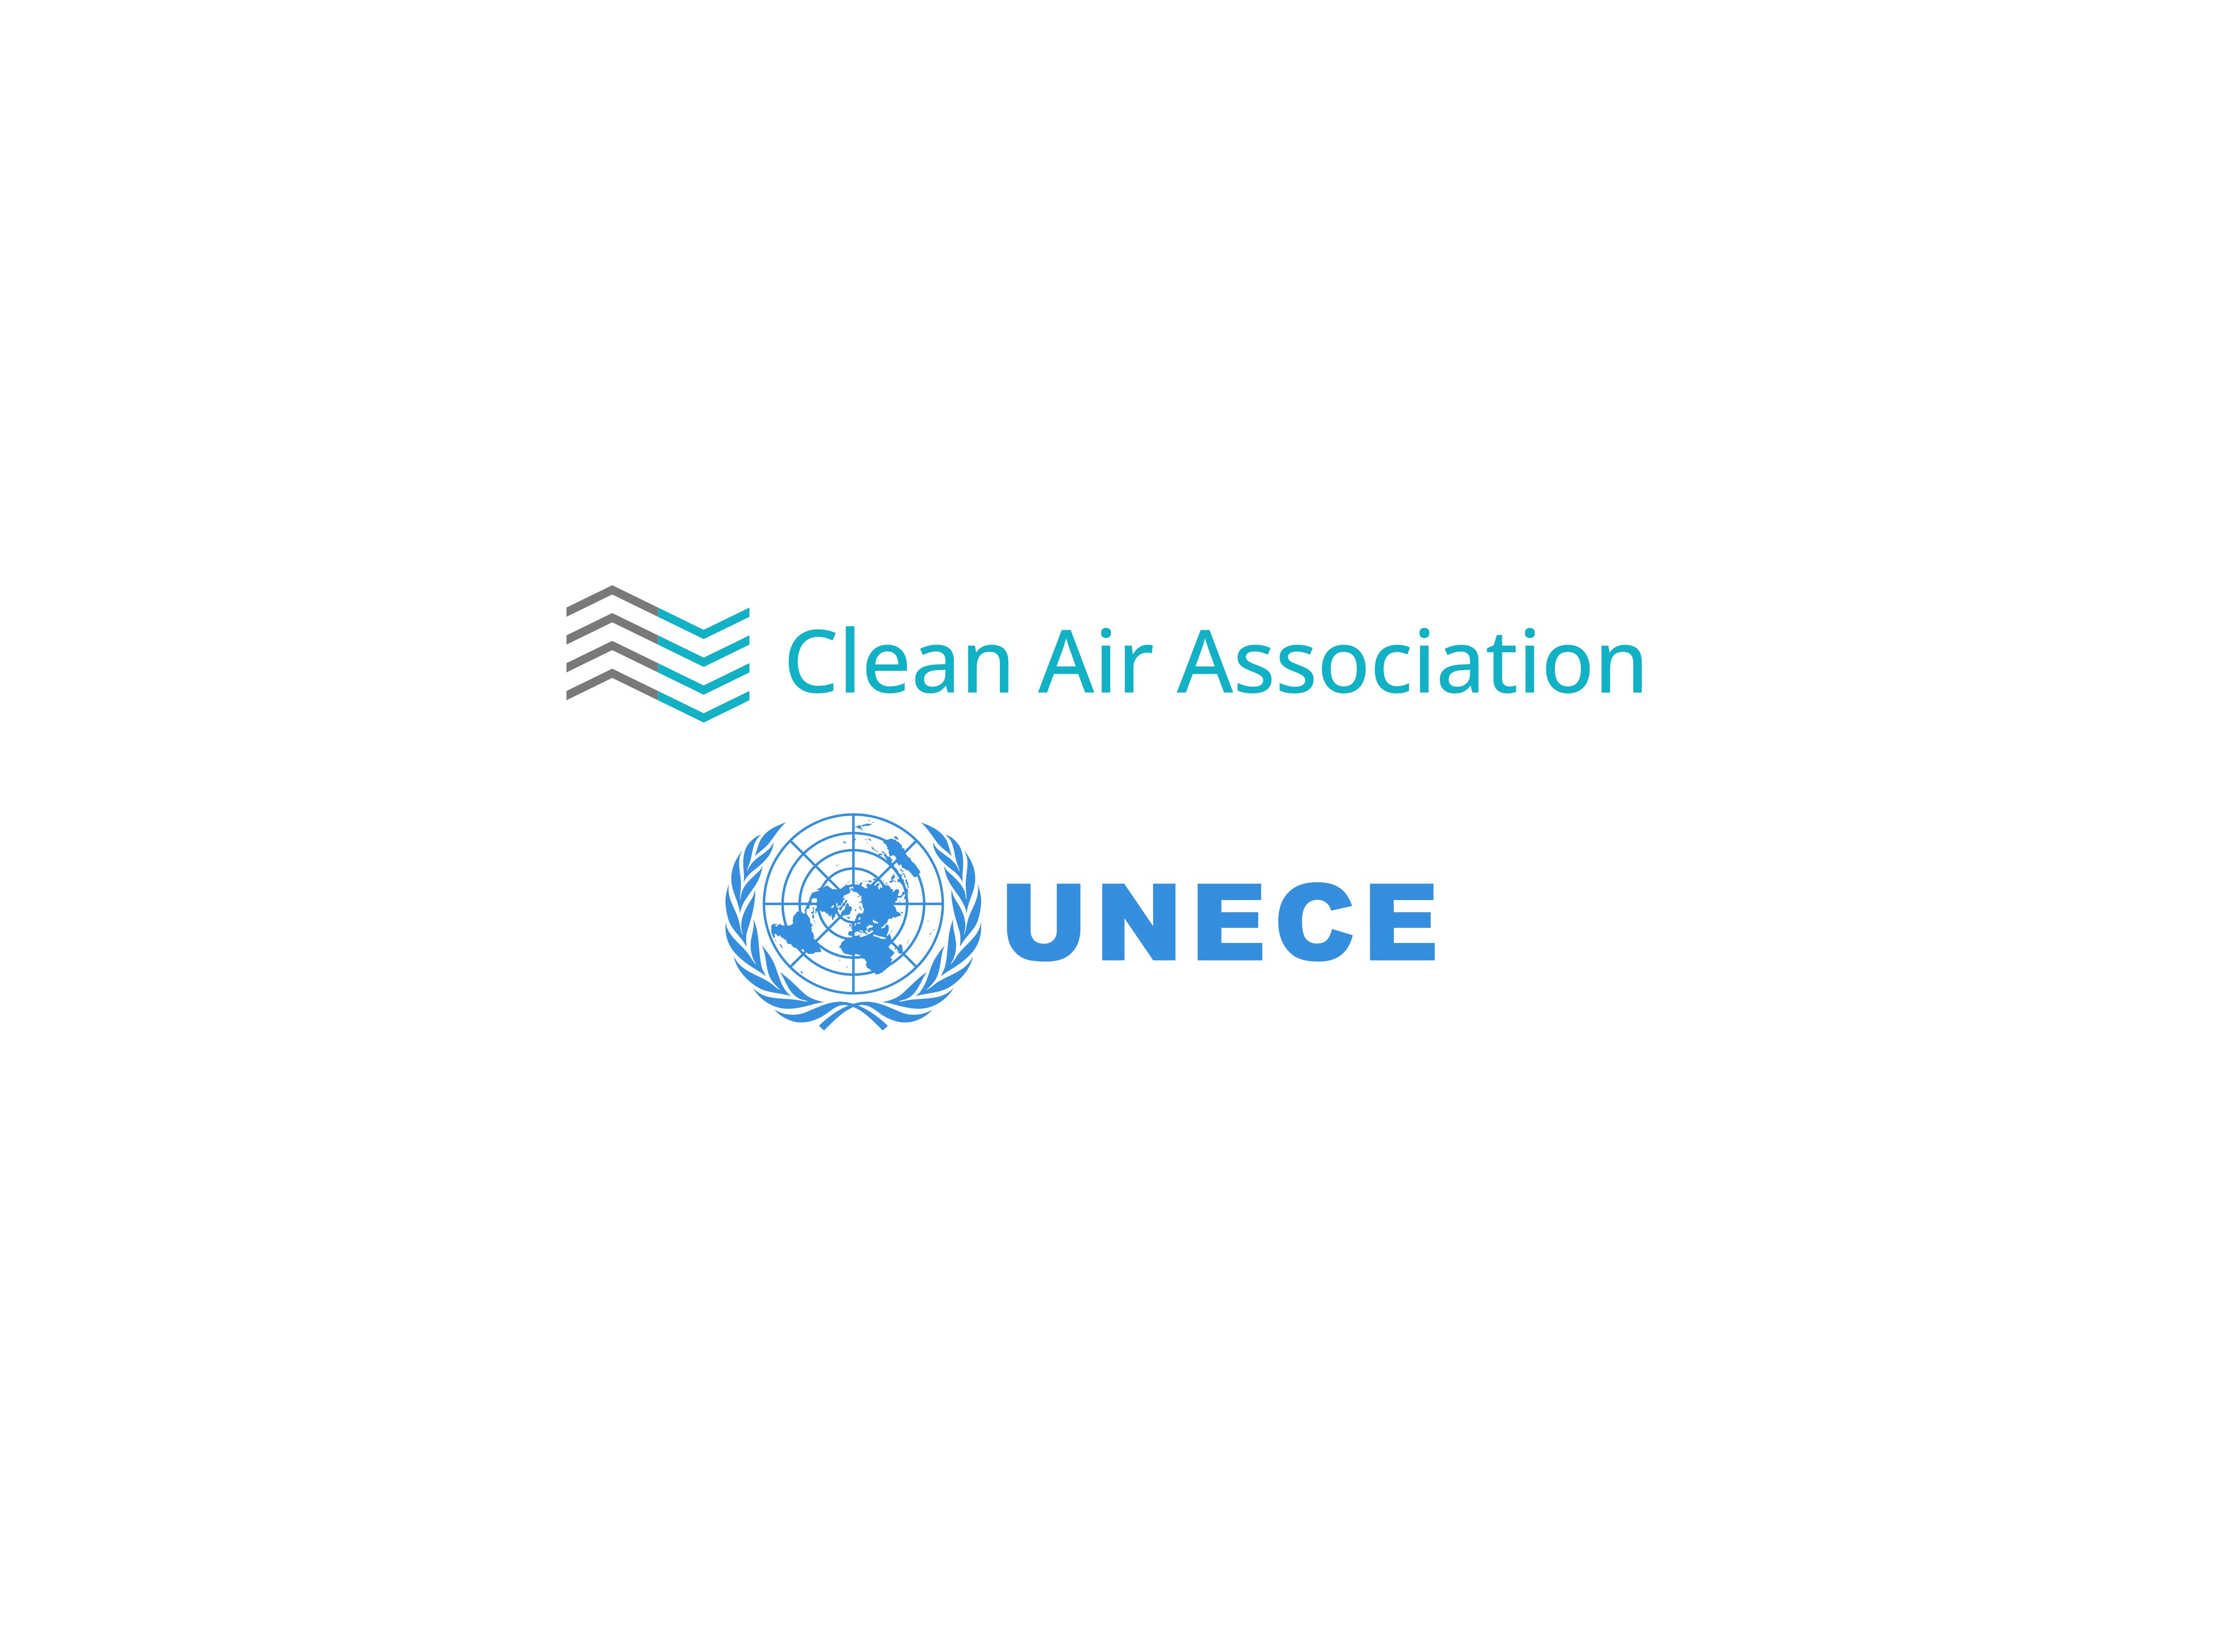 CAA and UNECE logos